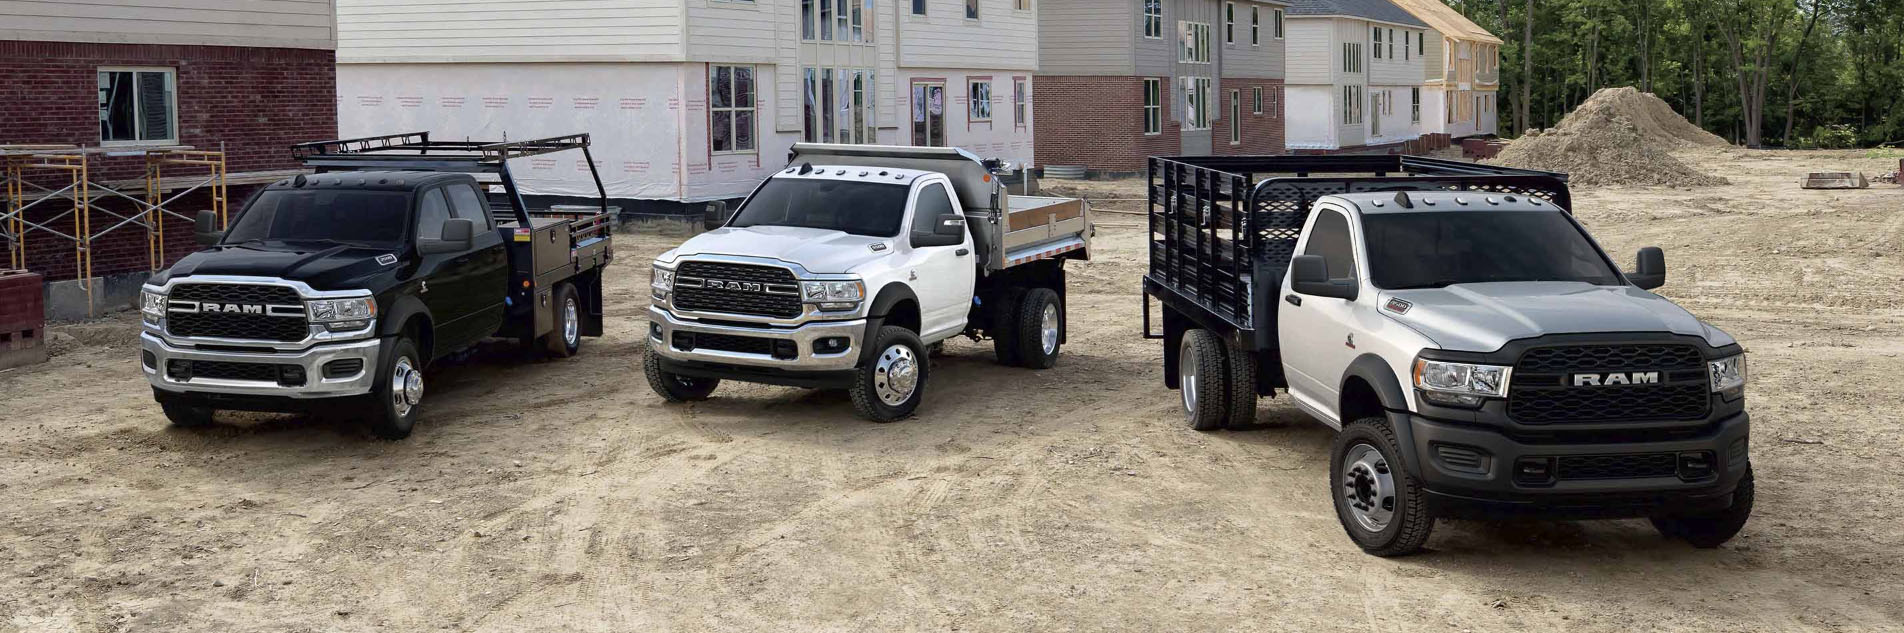 2023 RAM Chassis Cab Appearance Main Img